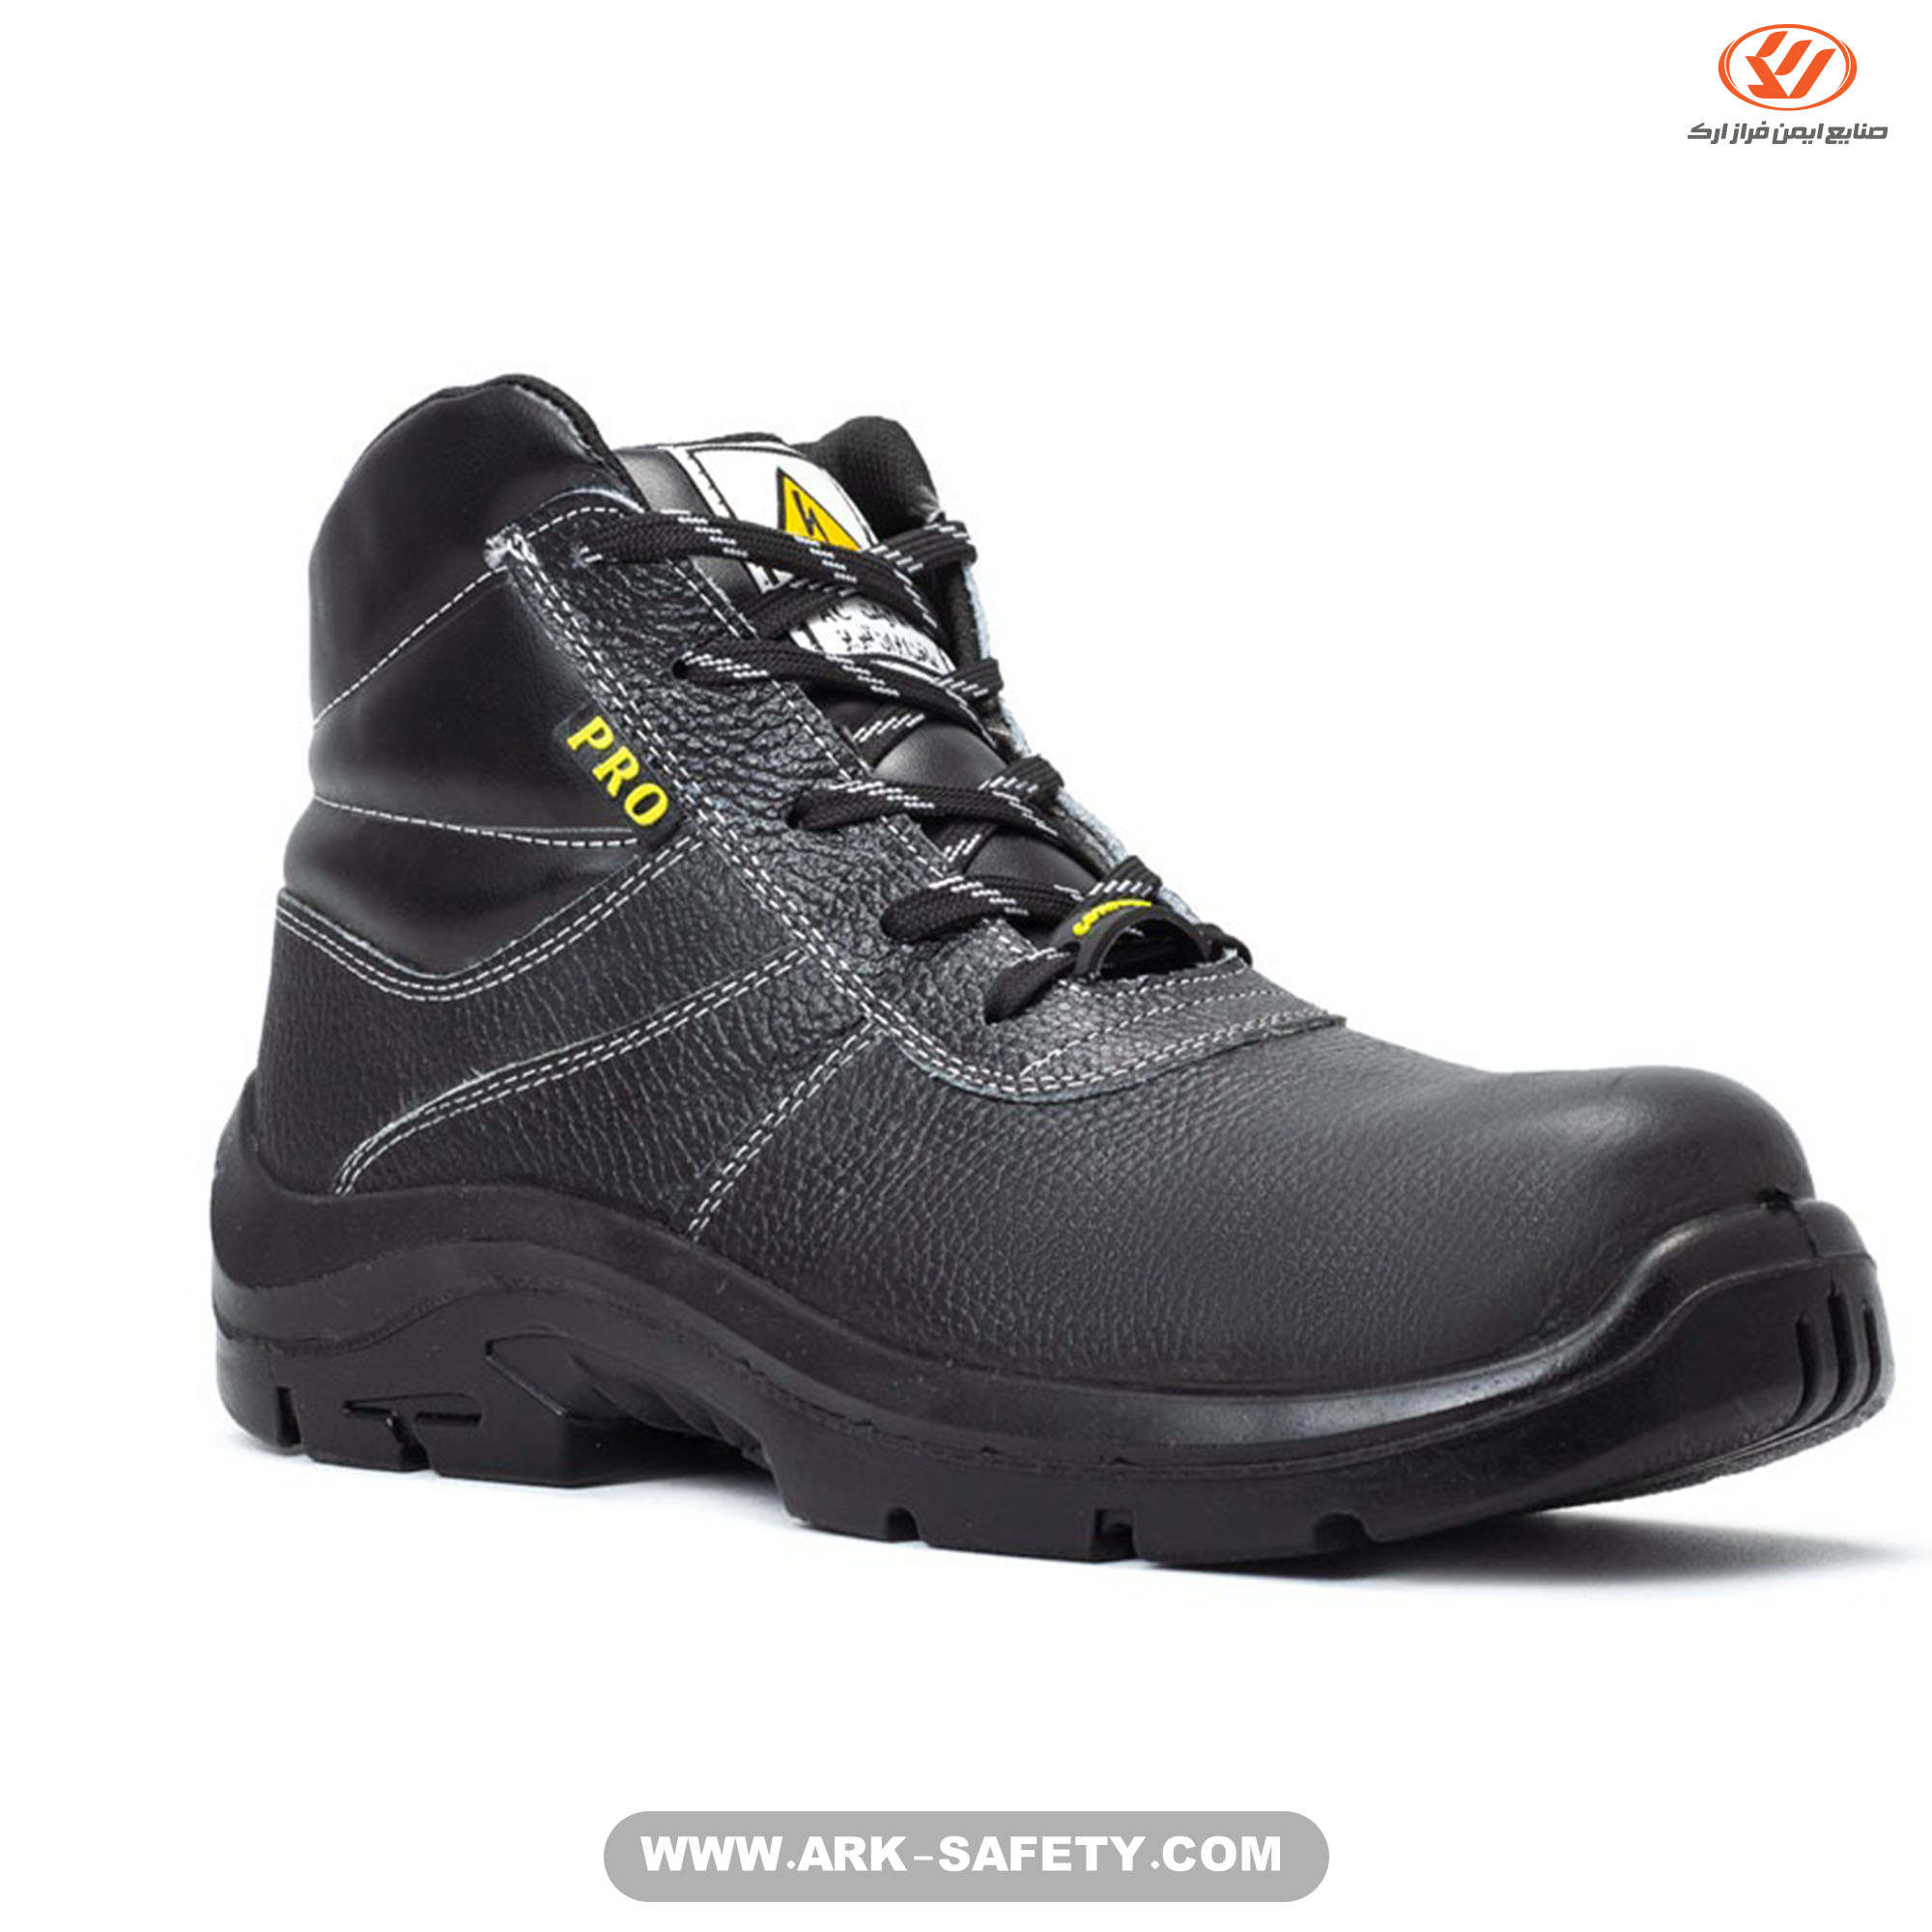 Pro composite safety boots